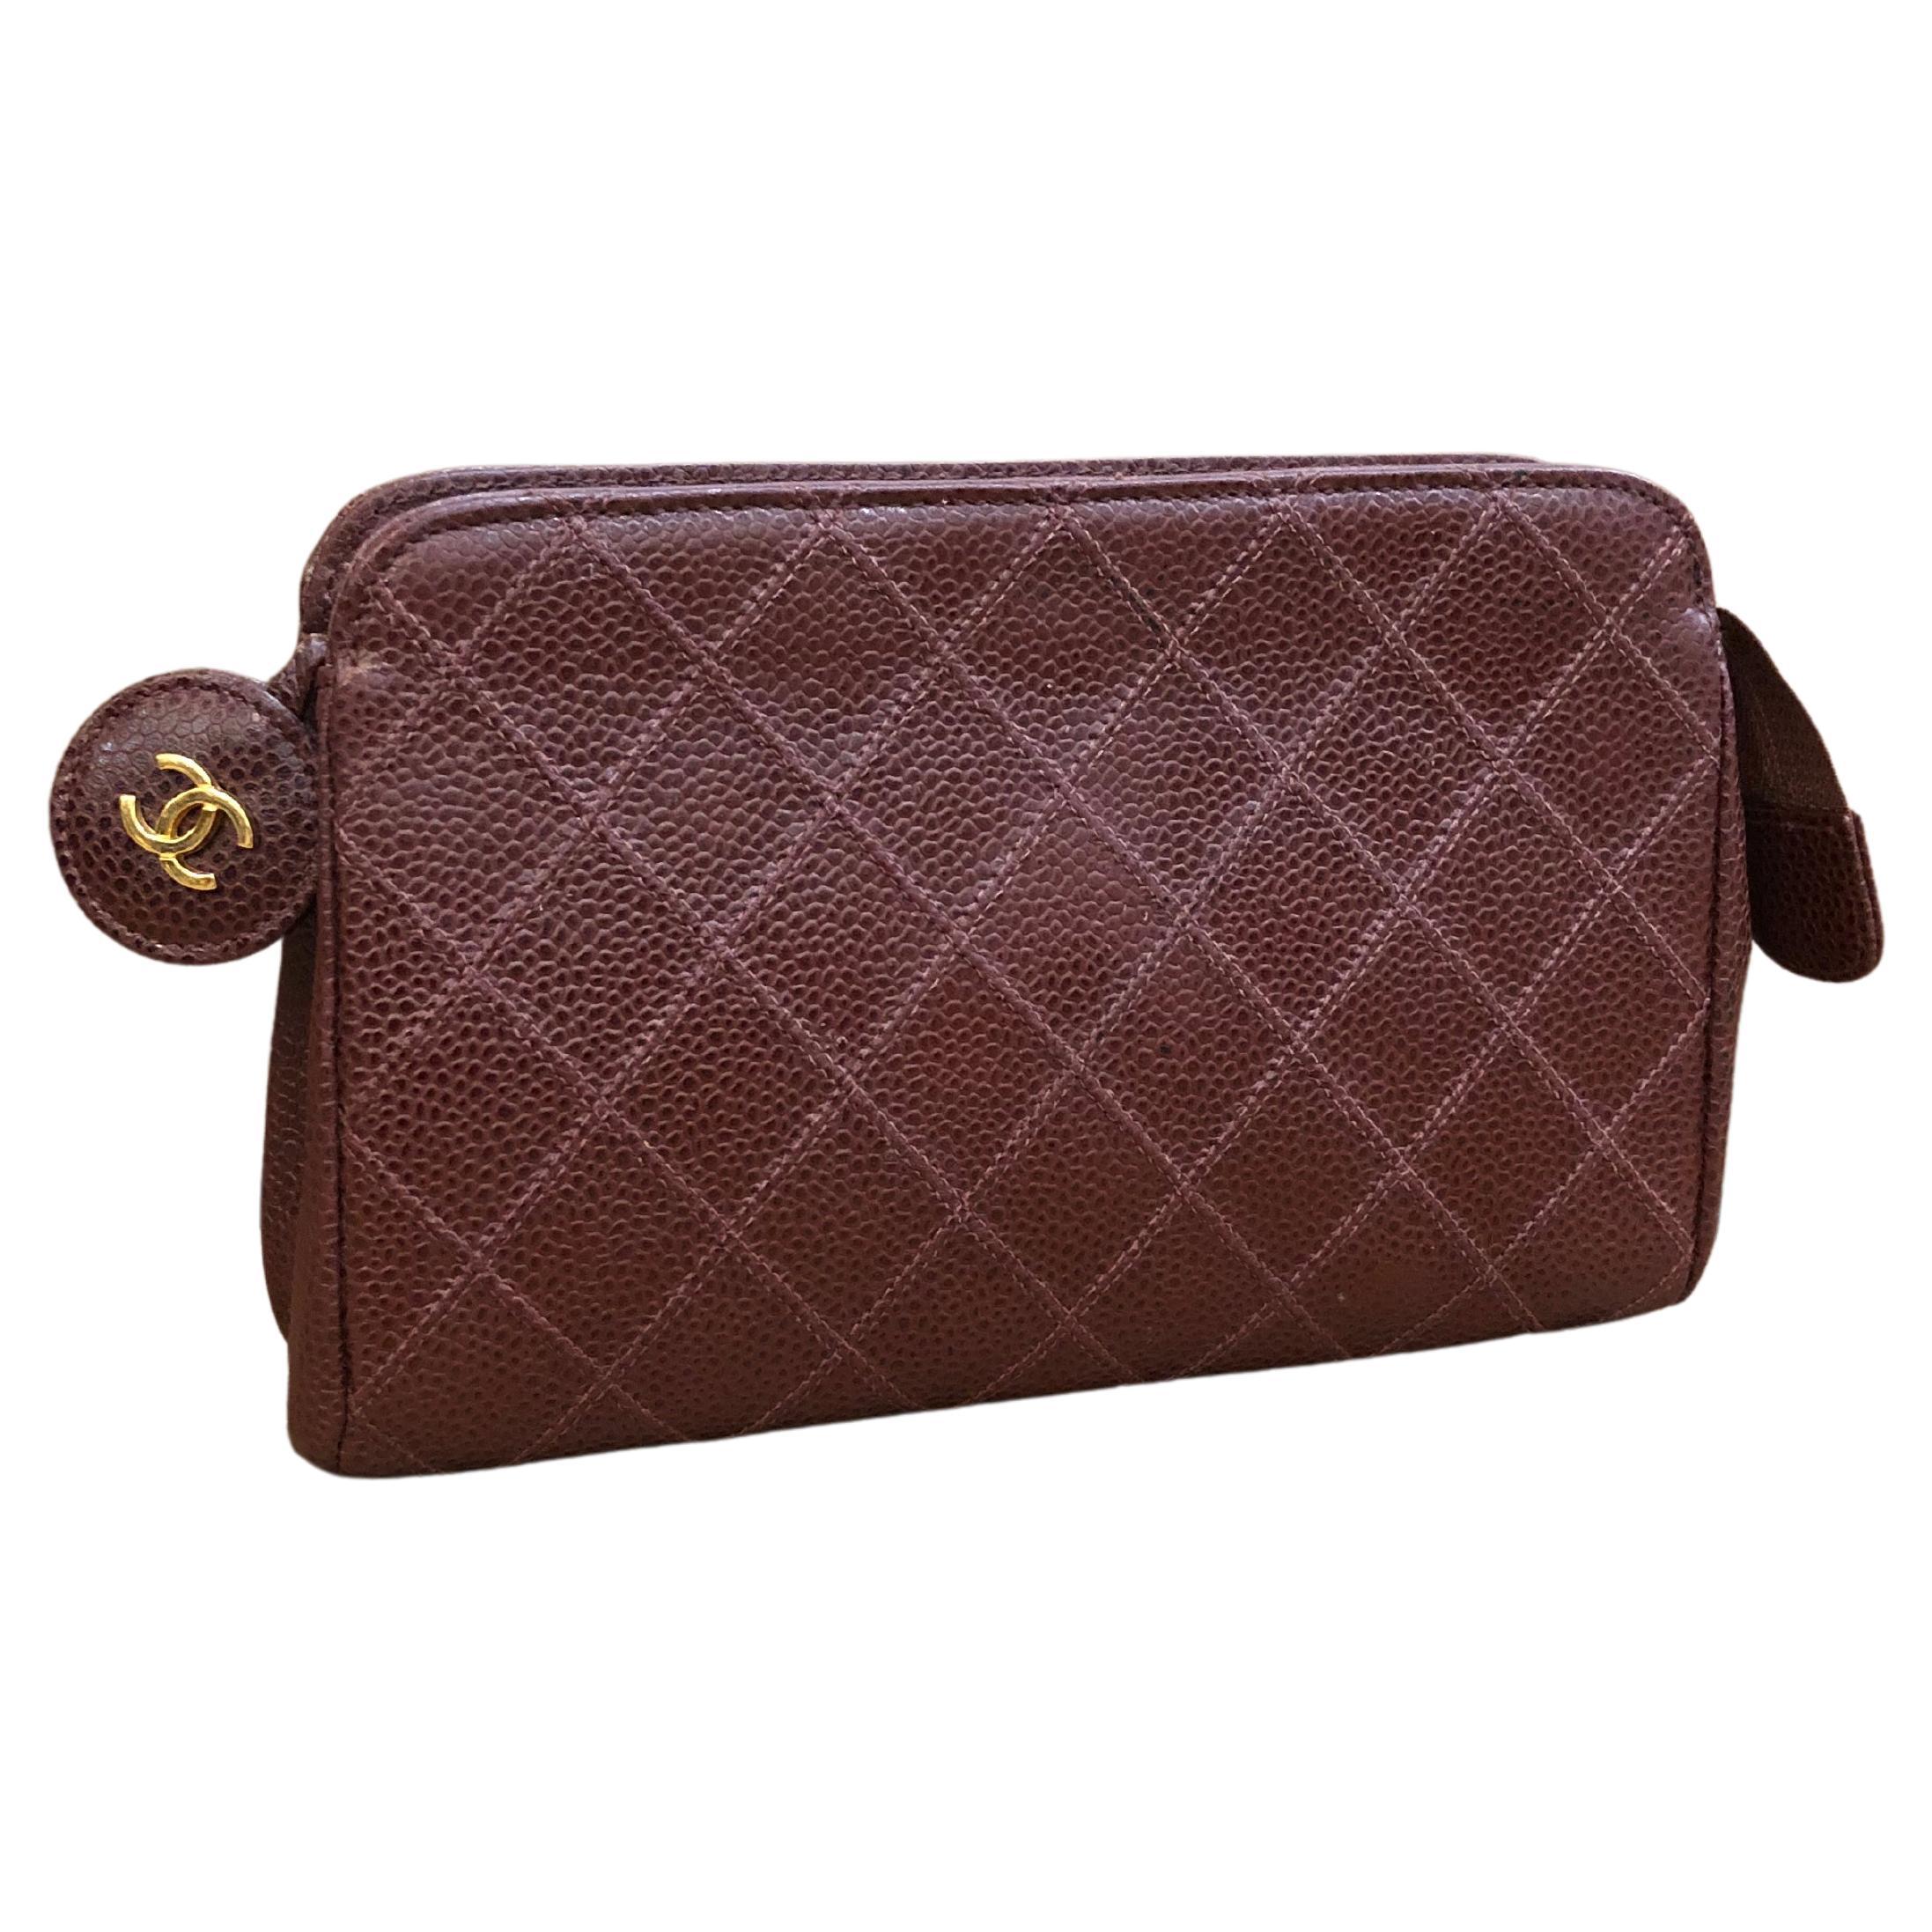 Vintage Chanel Clutch Brown Leather - 10 For Sale on 1stDibs